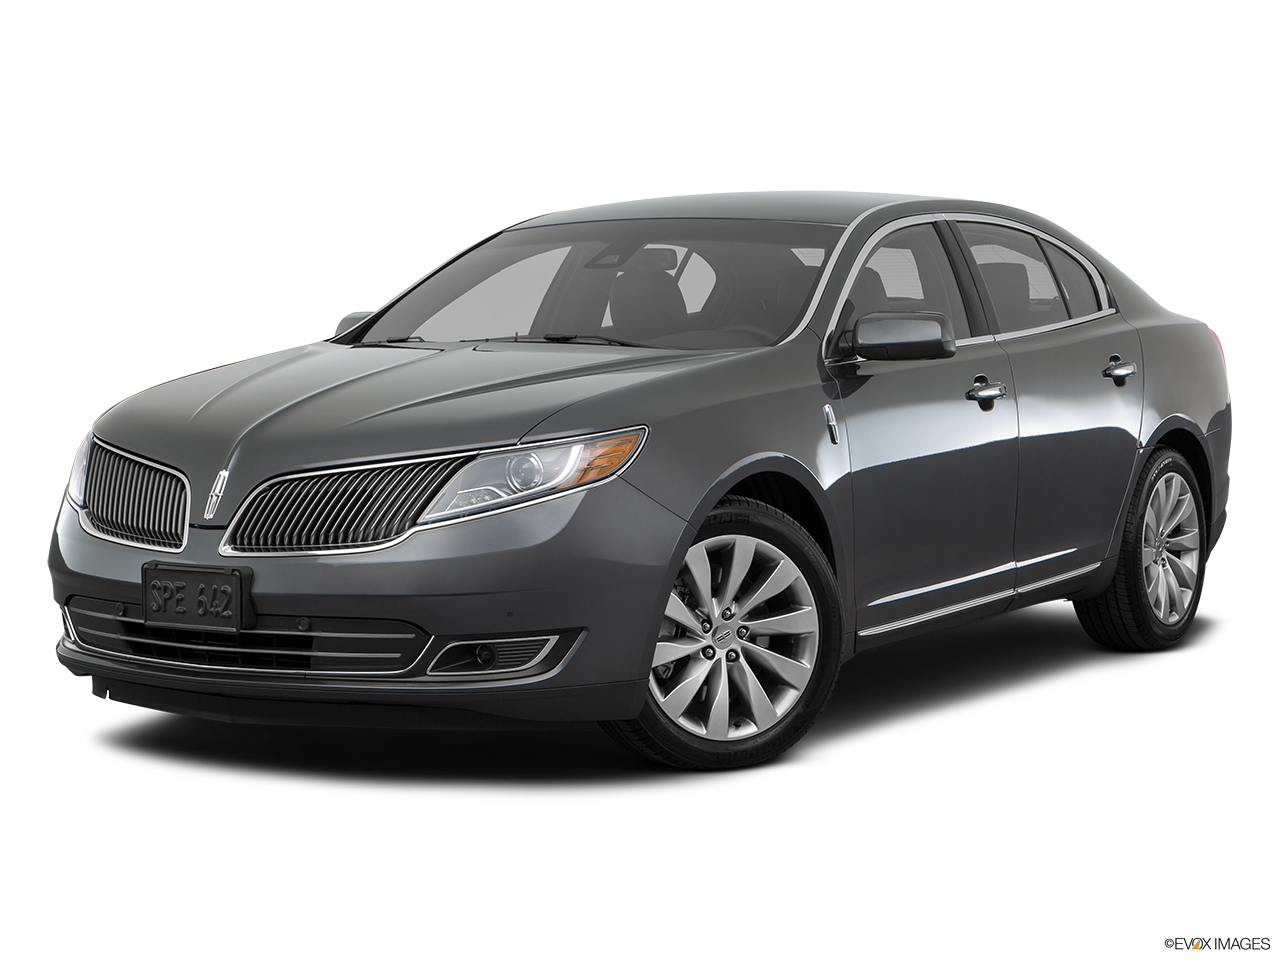 Test Drive A 2016 Lincoln MKS at Galpin Lincoln in Los Angeles